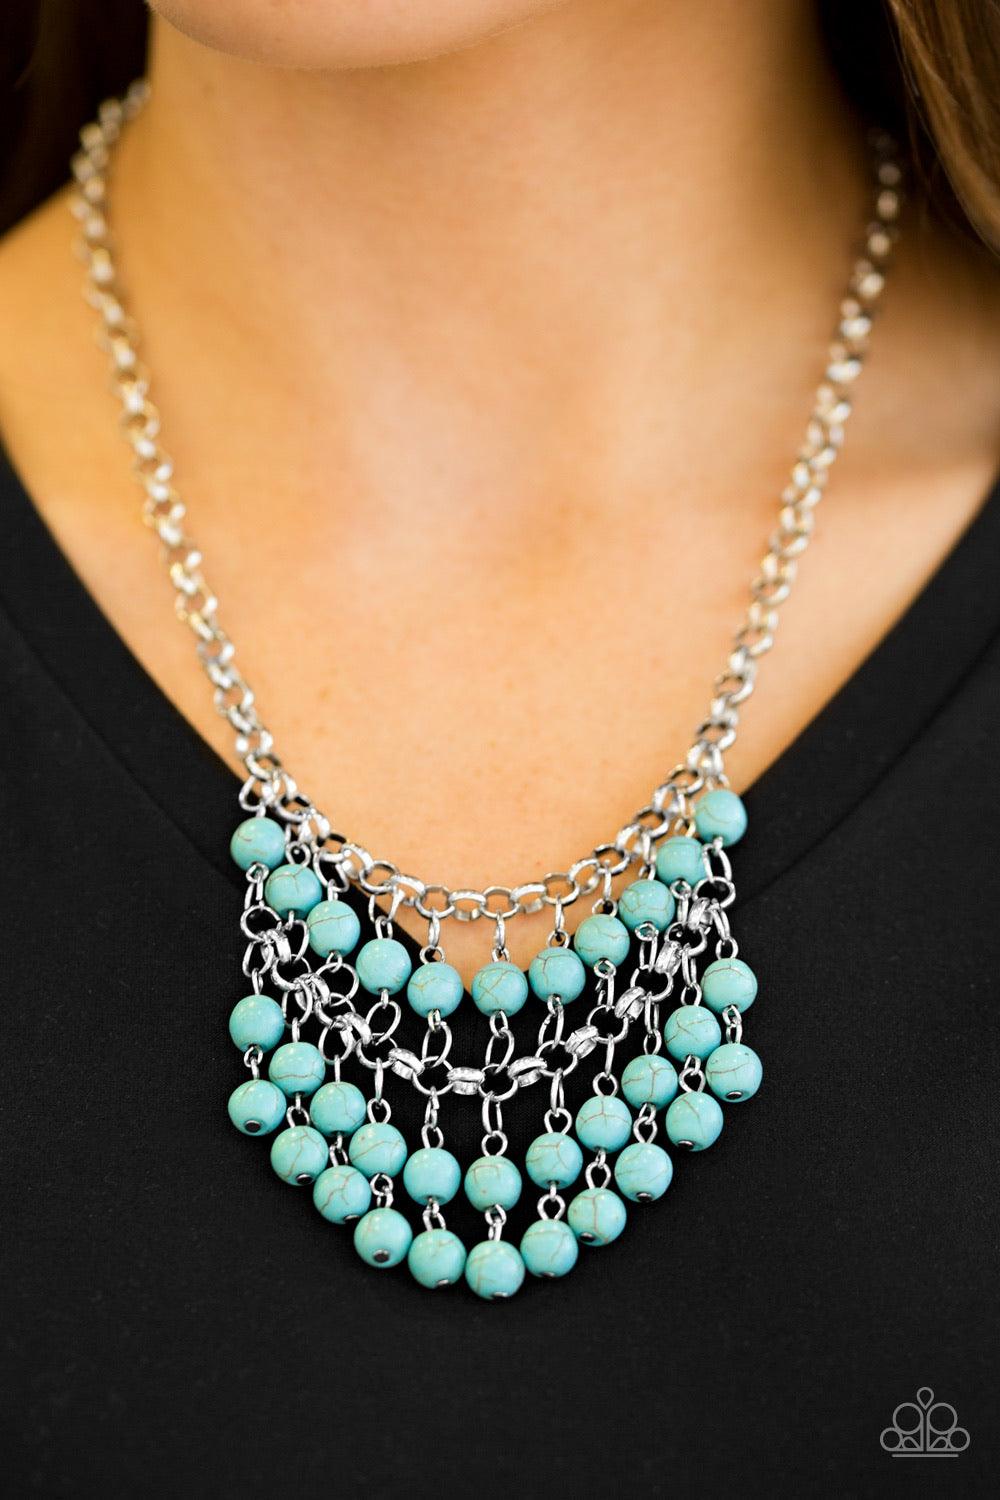 Paparazzi Accessories Jurassic Park Party - Blue Refreshing turquoise stone beads swing from the bottom of a netted silver chain, creating a bold artisanal fringe below the collar. Features an adjustable clasp closure. Sold as one individual necklace. Inc